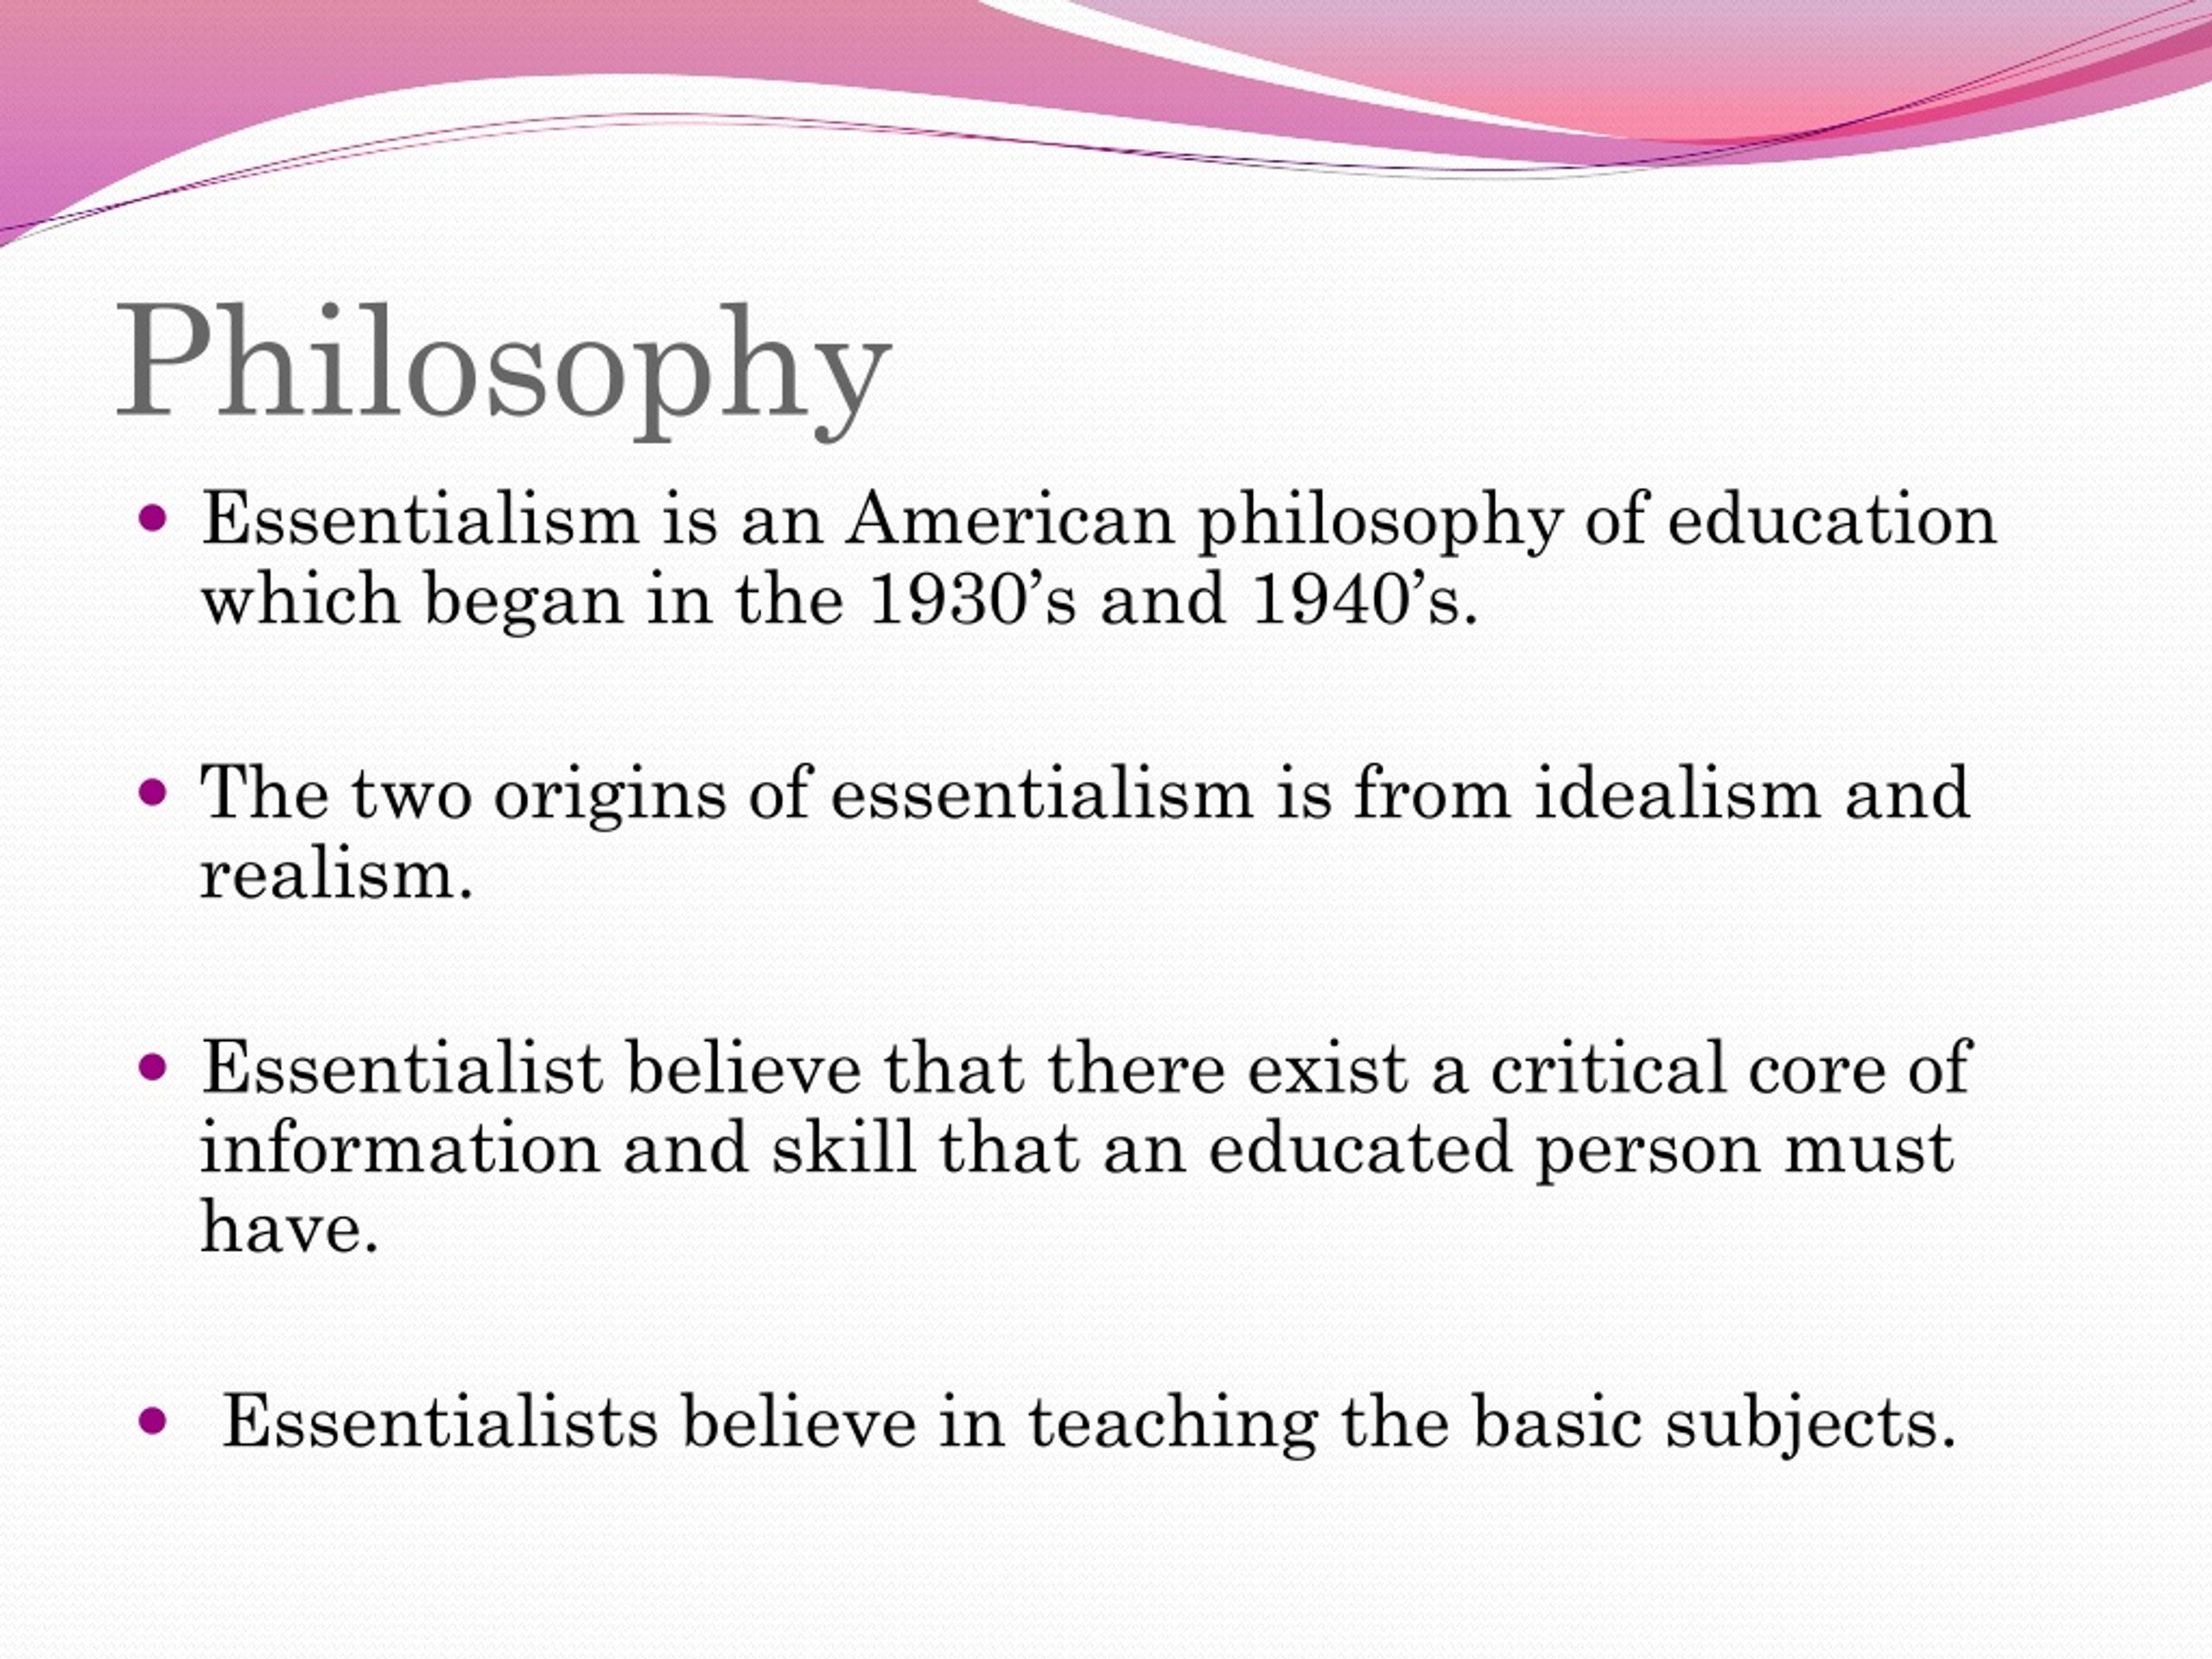 what is the strongest criticism of essentialism in education